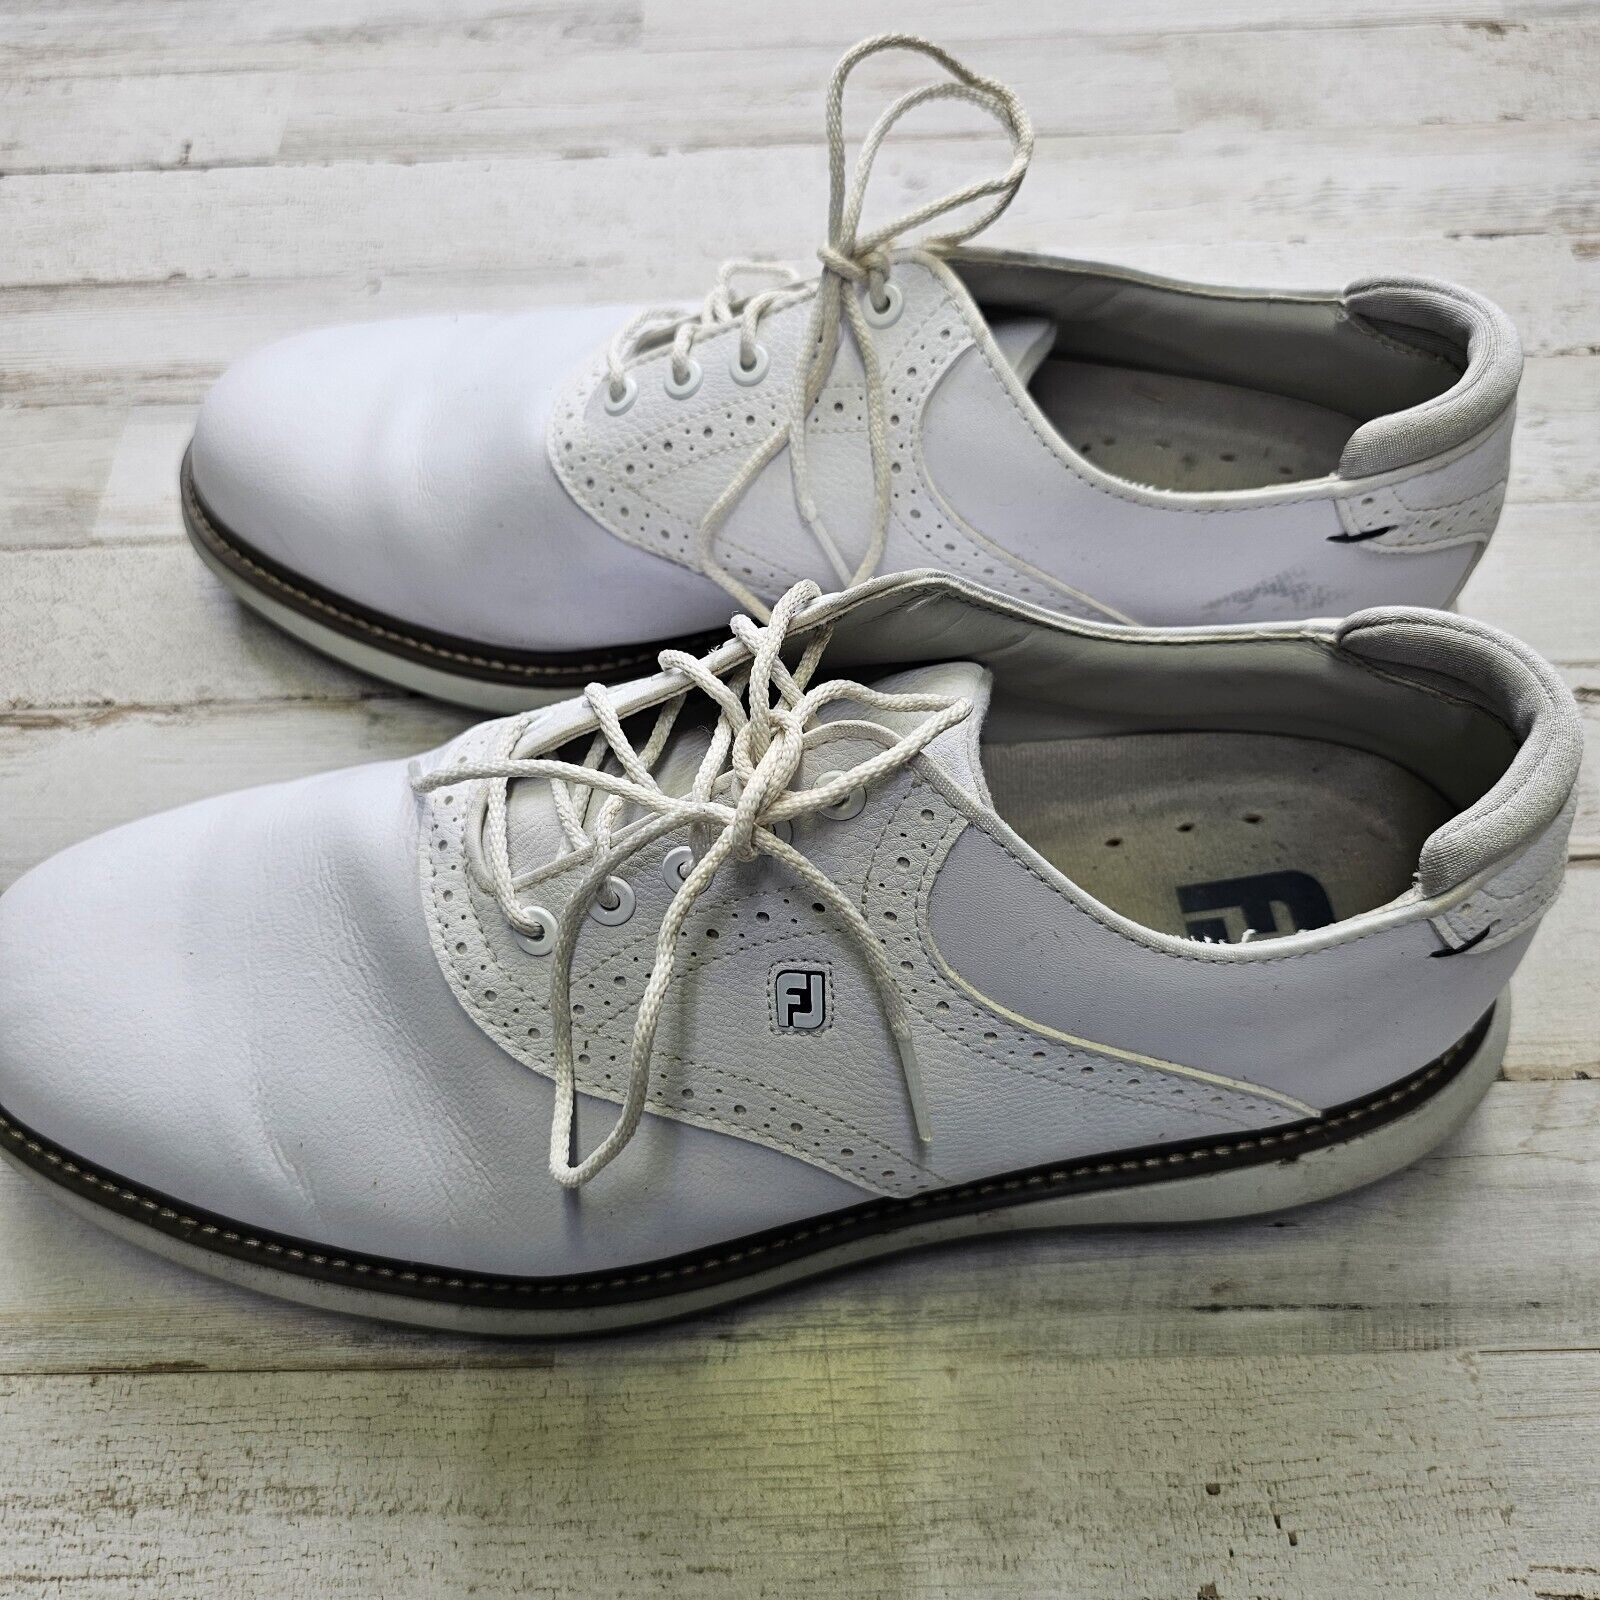 Footjoy FJ Traditions Golf Shoes Men\'s 12W White Leather Lace Up 57903